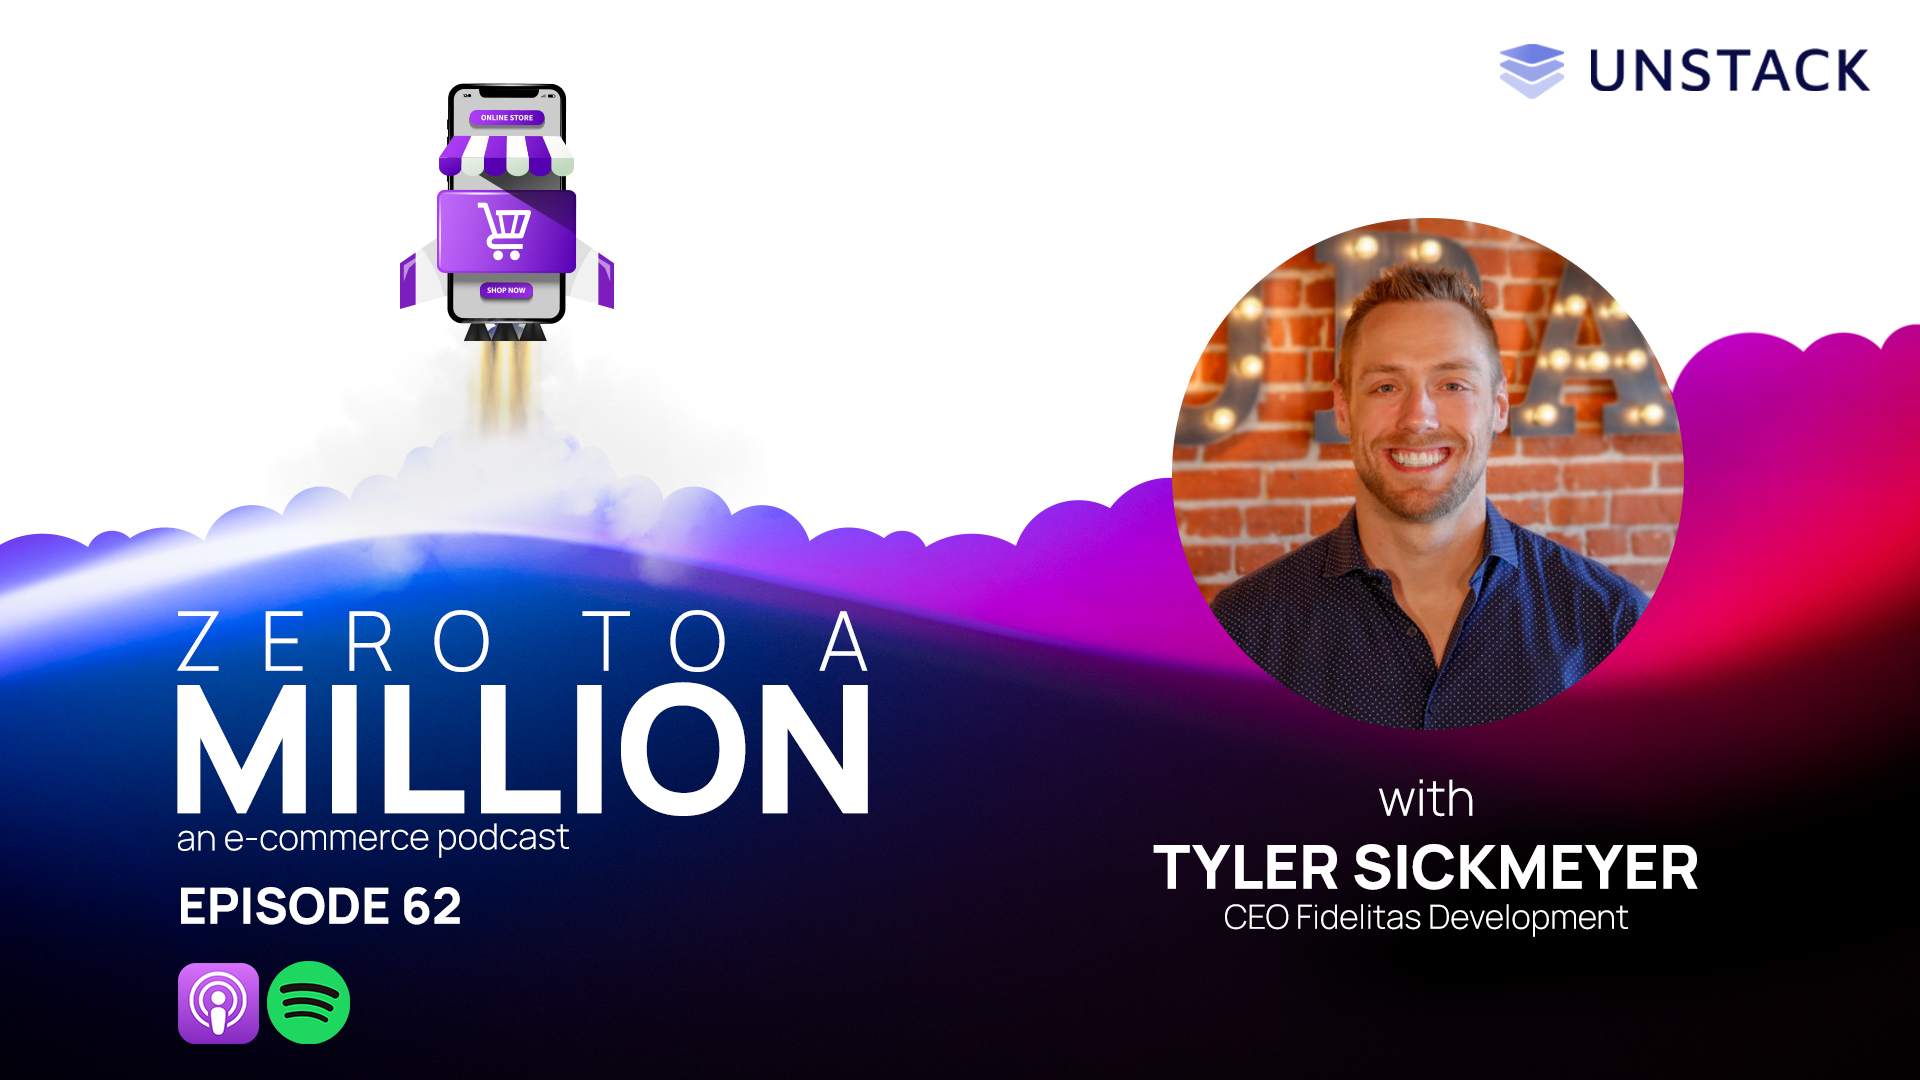 Creating an Effective PR Strategy for Your eCommerce Brand with Tyler Sickmeyer